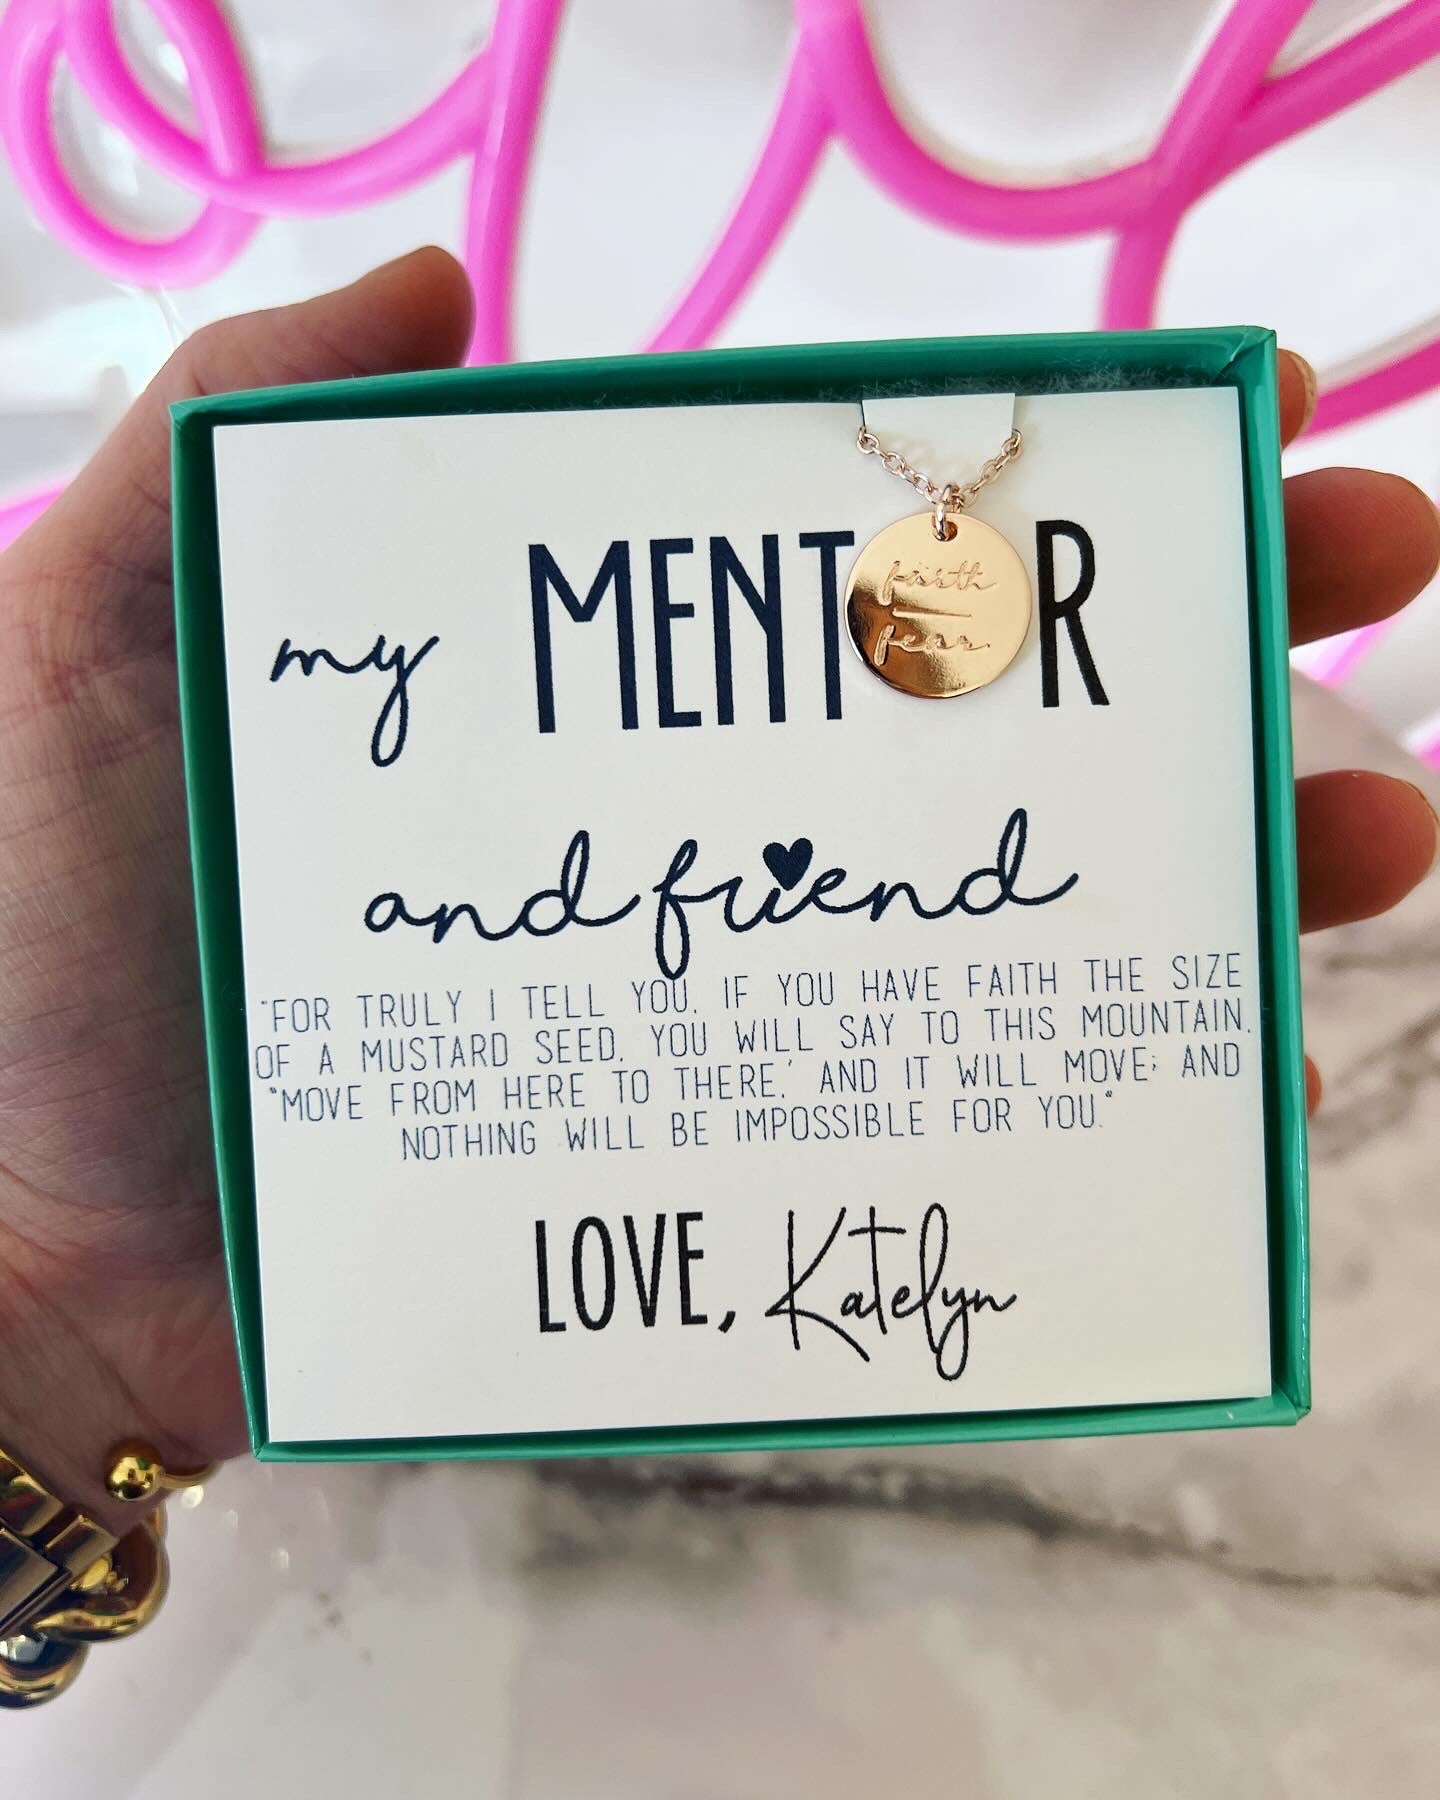 Mentor and Friend Necklace! Faith over Fear Gold Pendant Necklace!